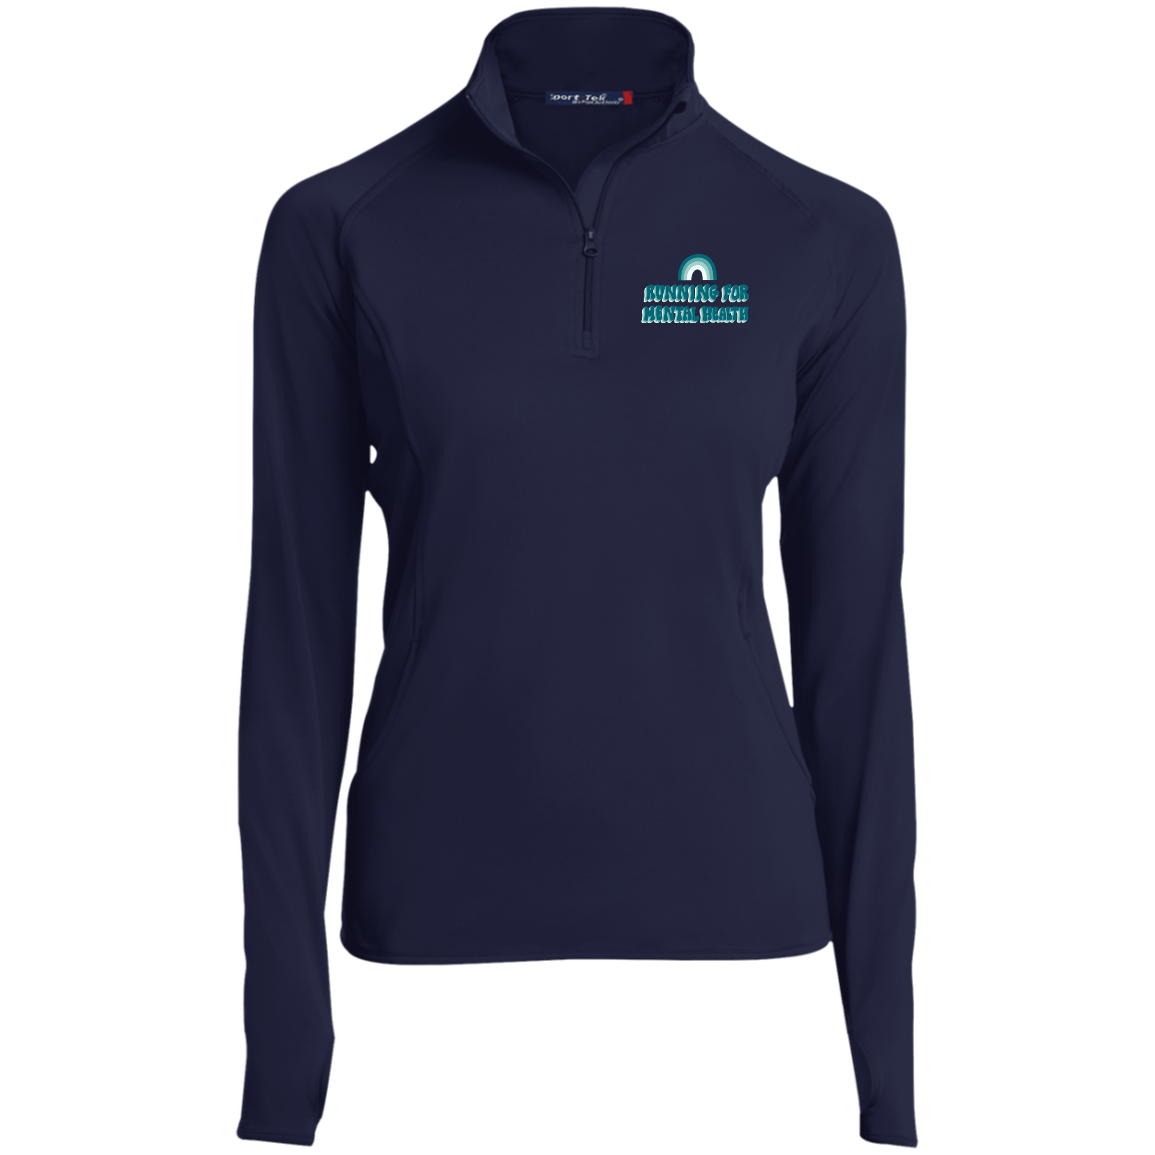 Rainbow Running for Mental Health - Fitted 1/2 Zip Performance Pullover